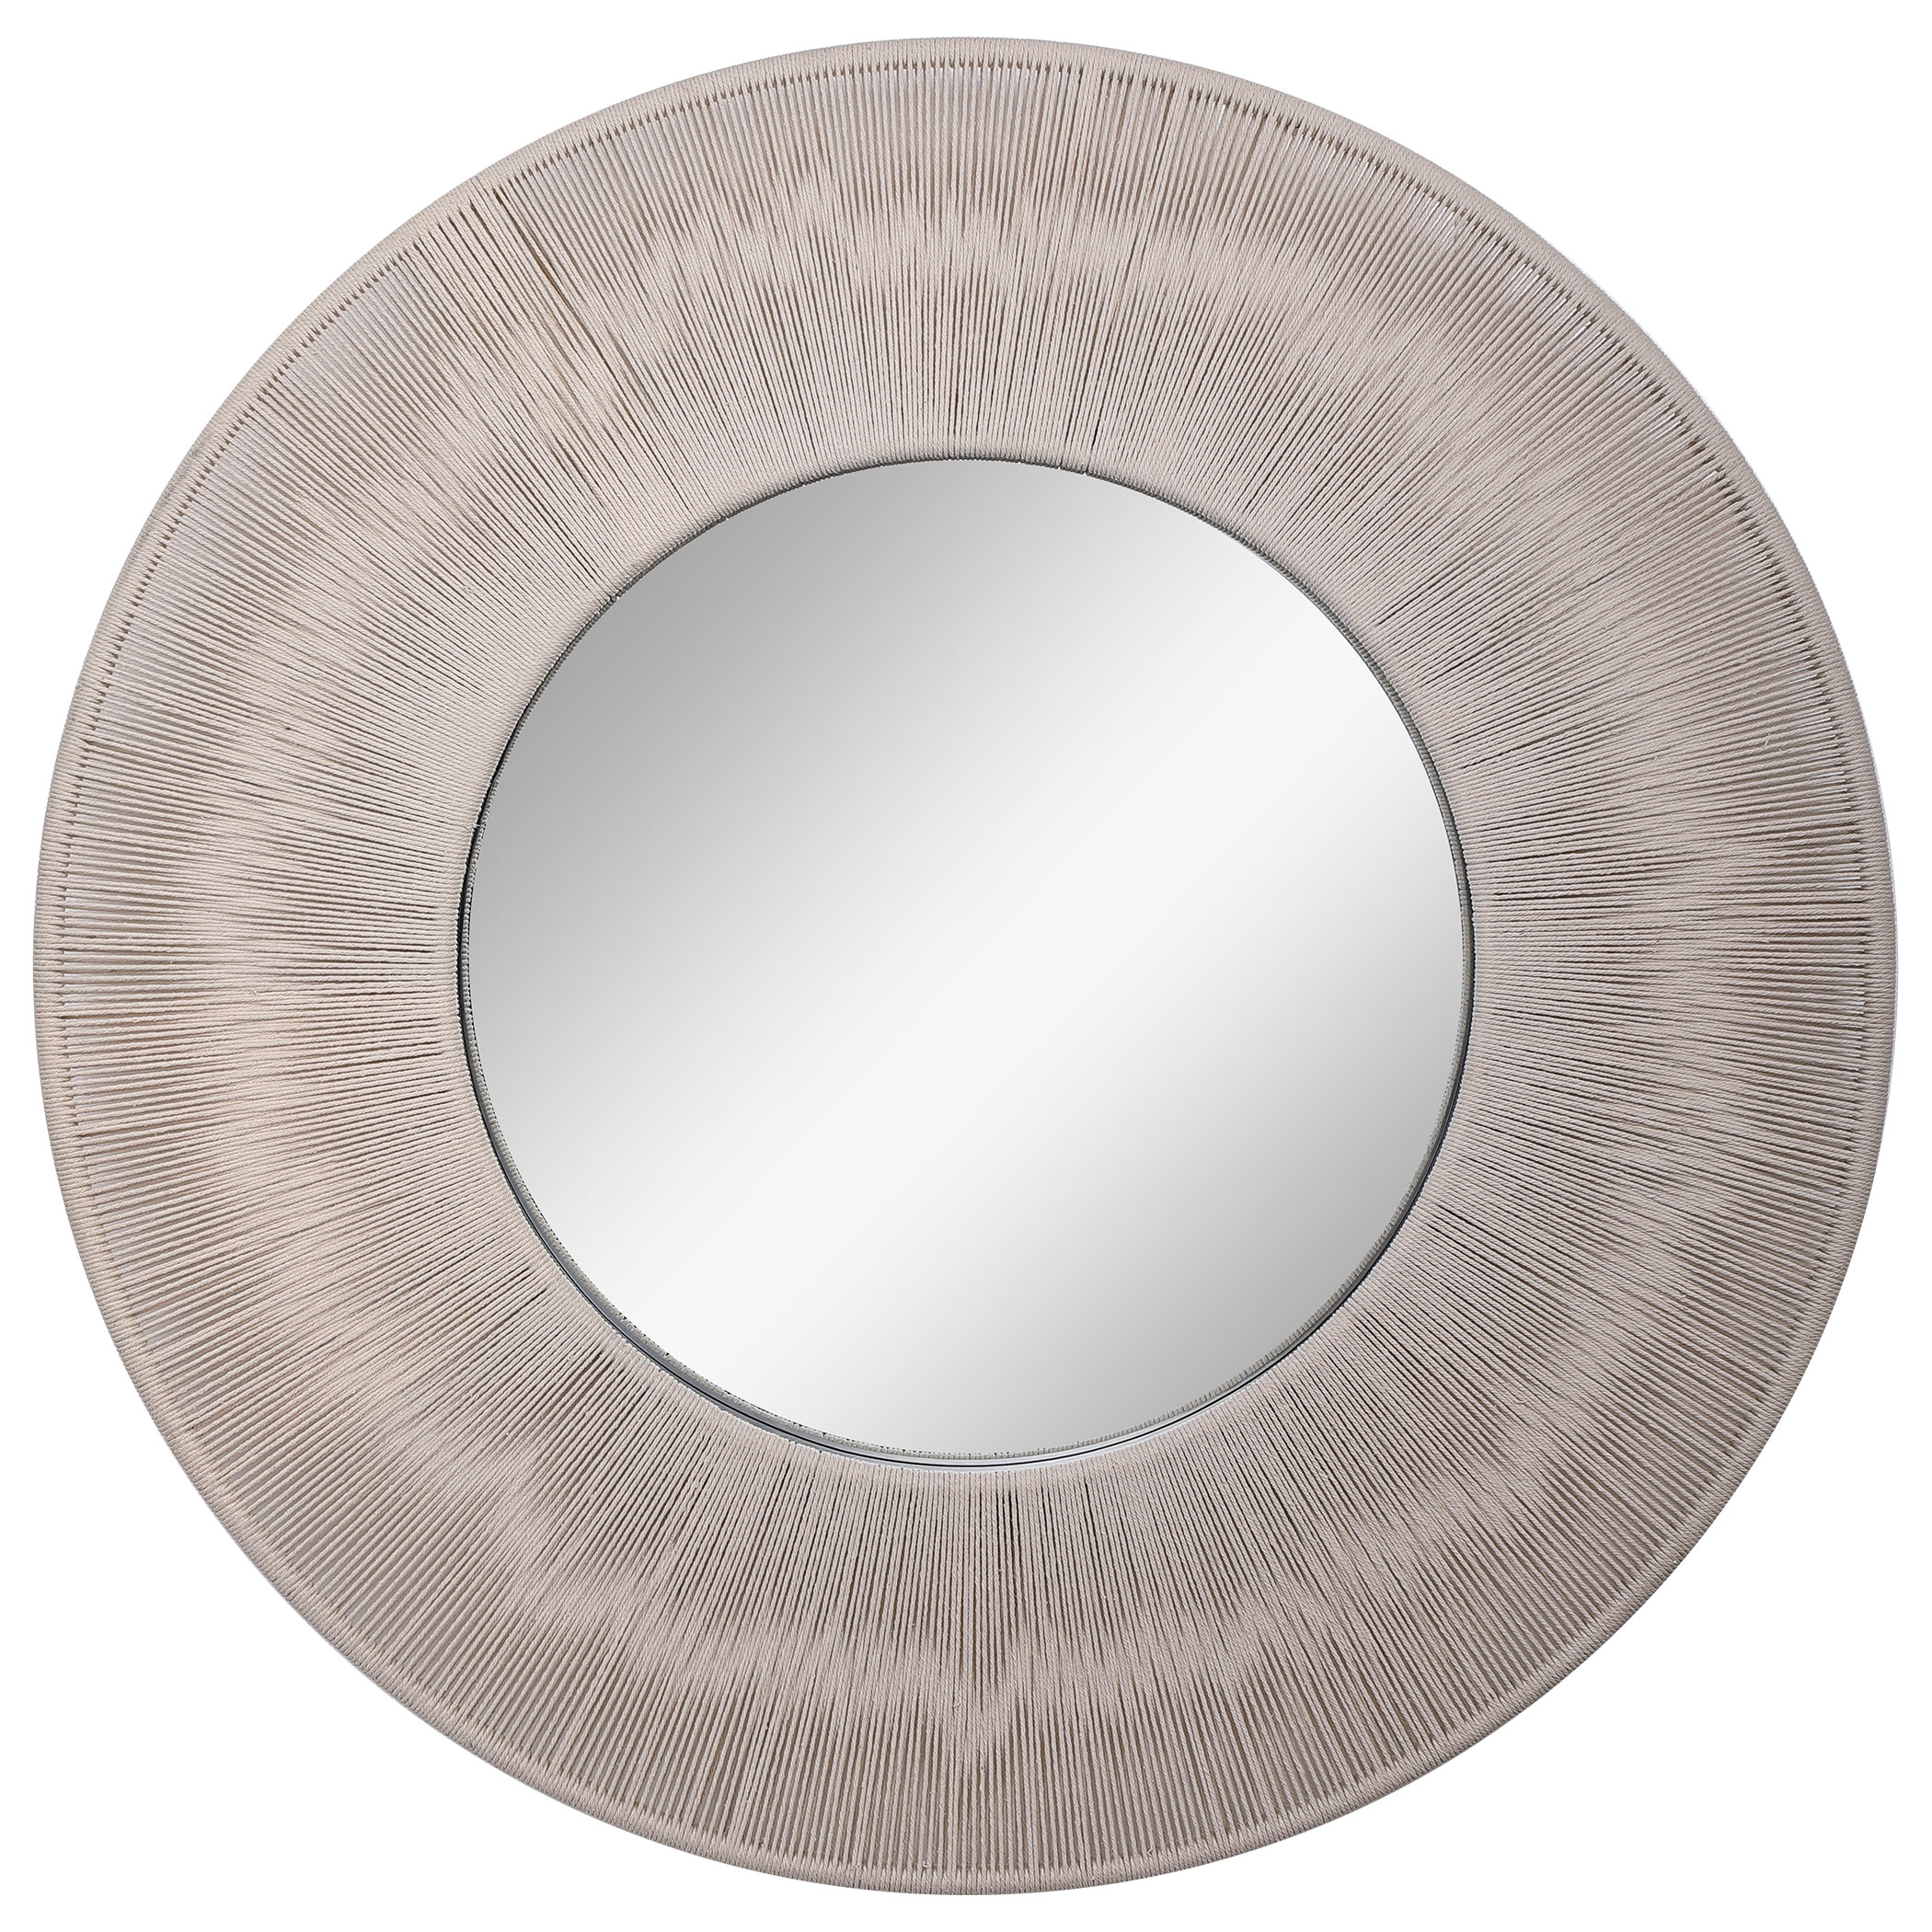 Online Designer Combined Living/Dining Sailor's Knot Round Mirror